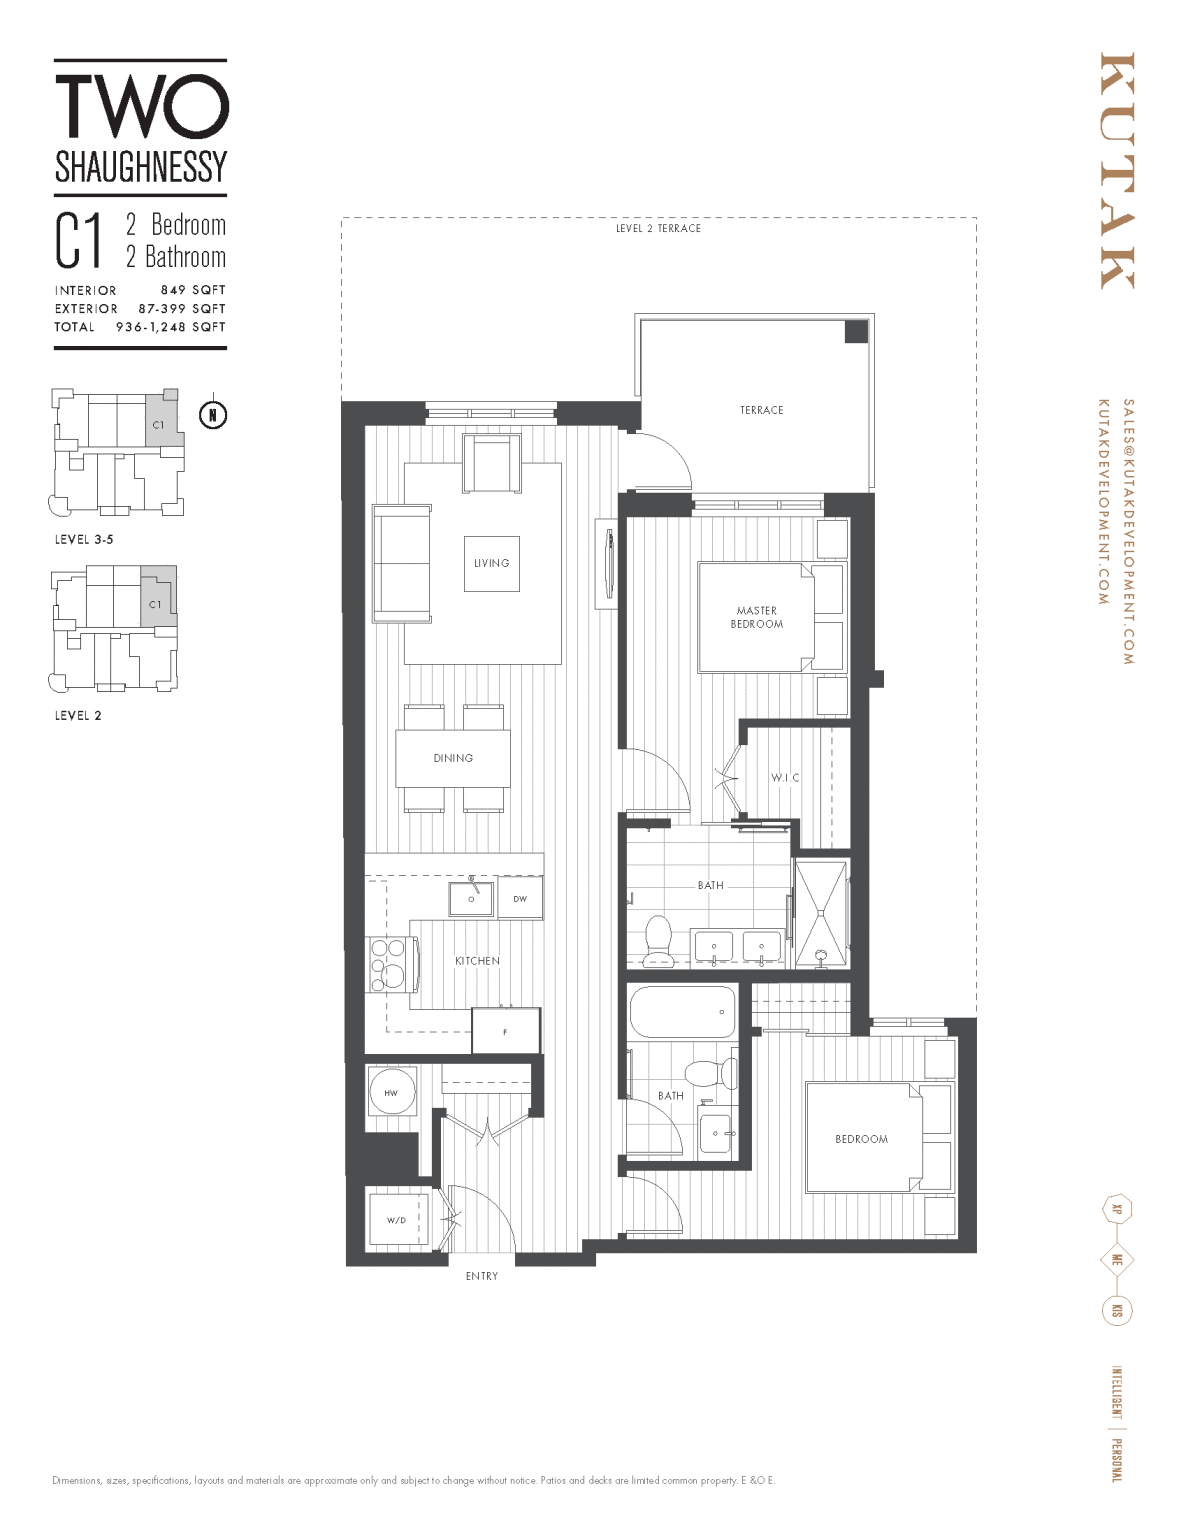 Two Shaughnessy Floor Plan C1